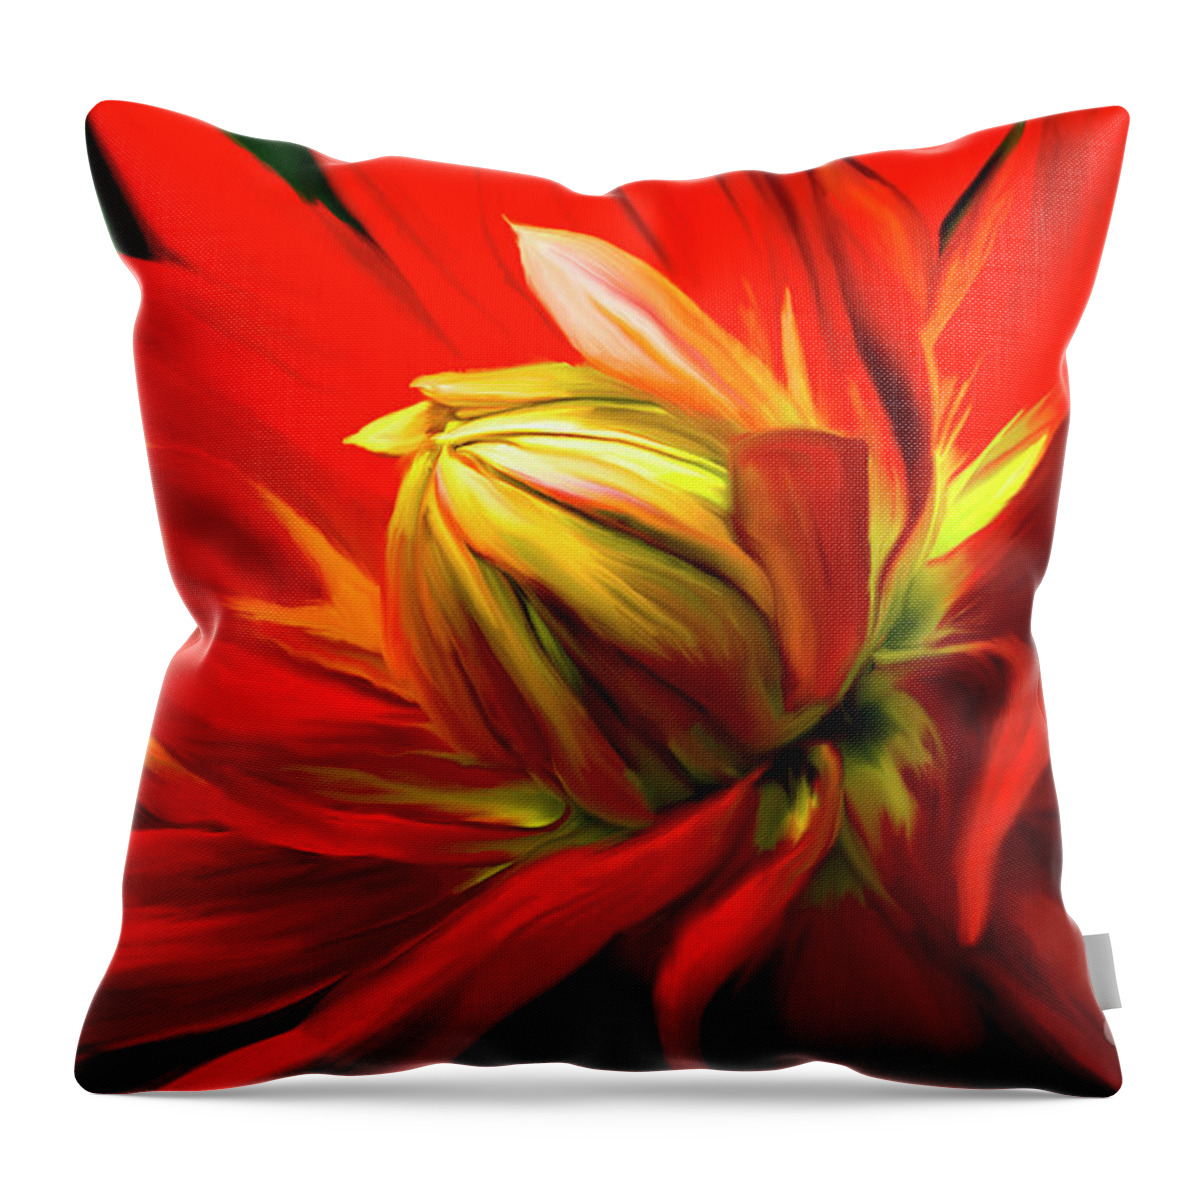 Artwork Throw Pillow featuring the painting Painted Dahlia In Full Bloom by Sherry Curry